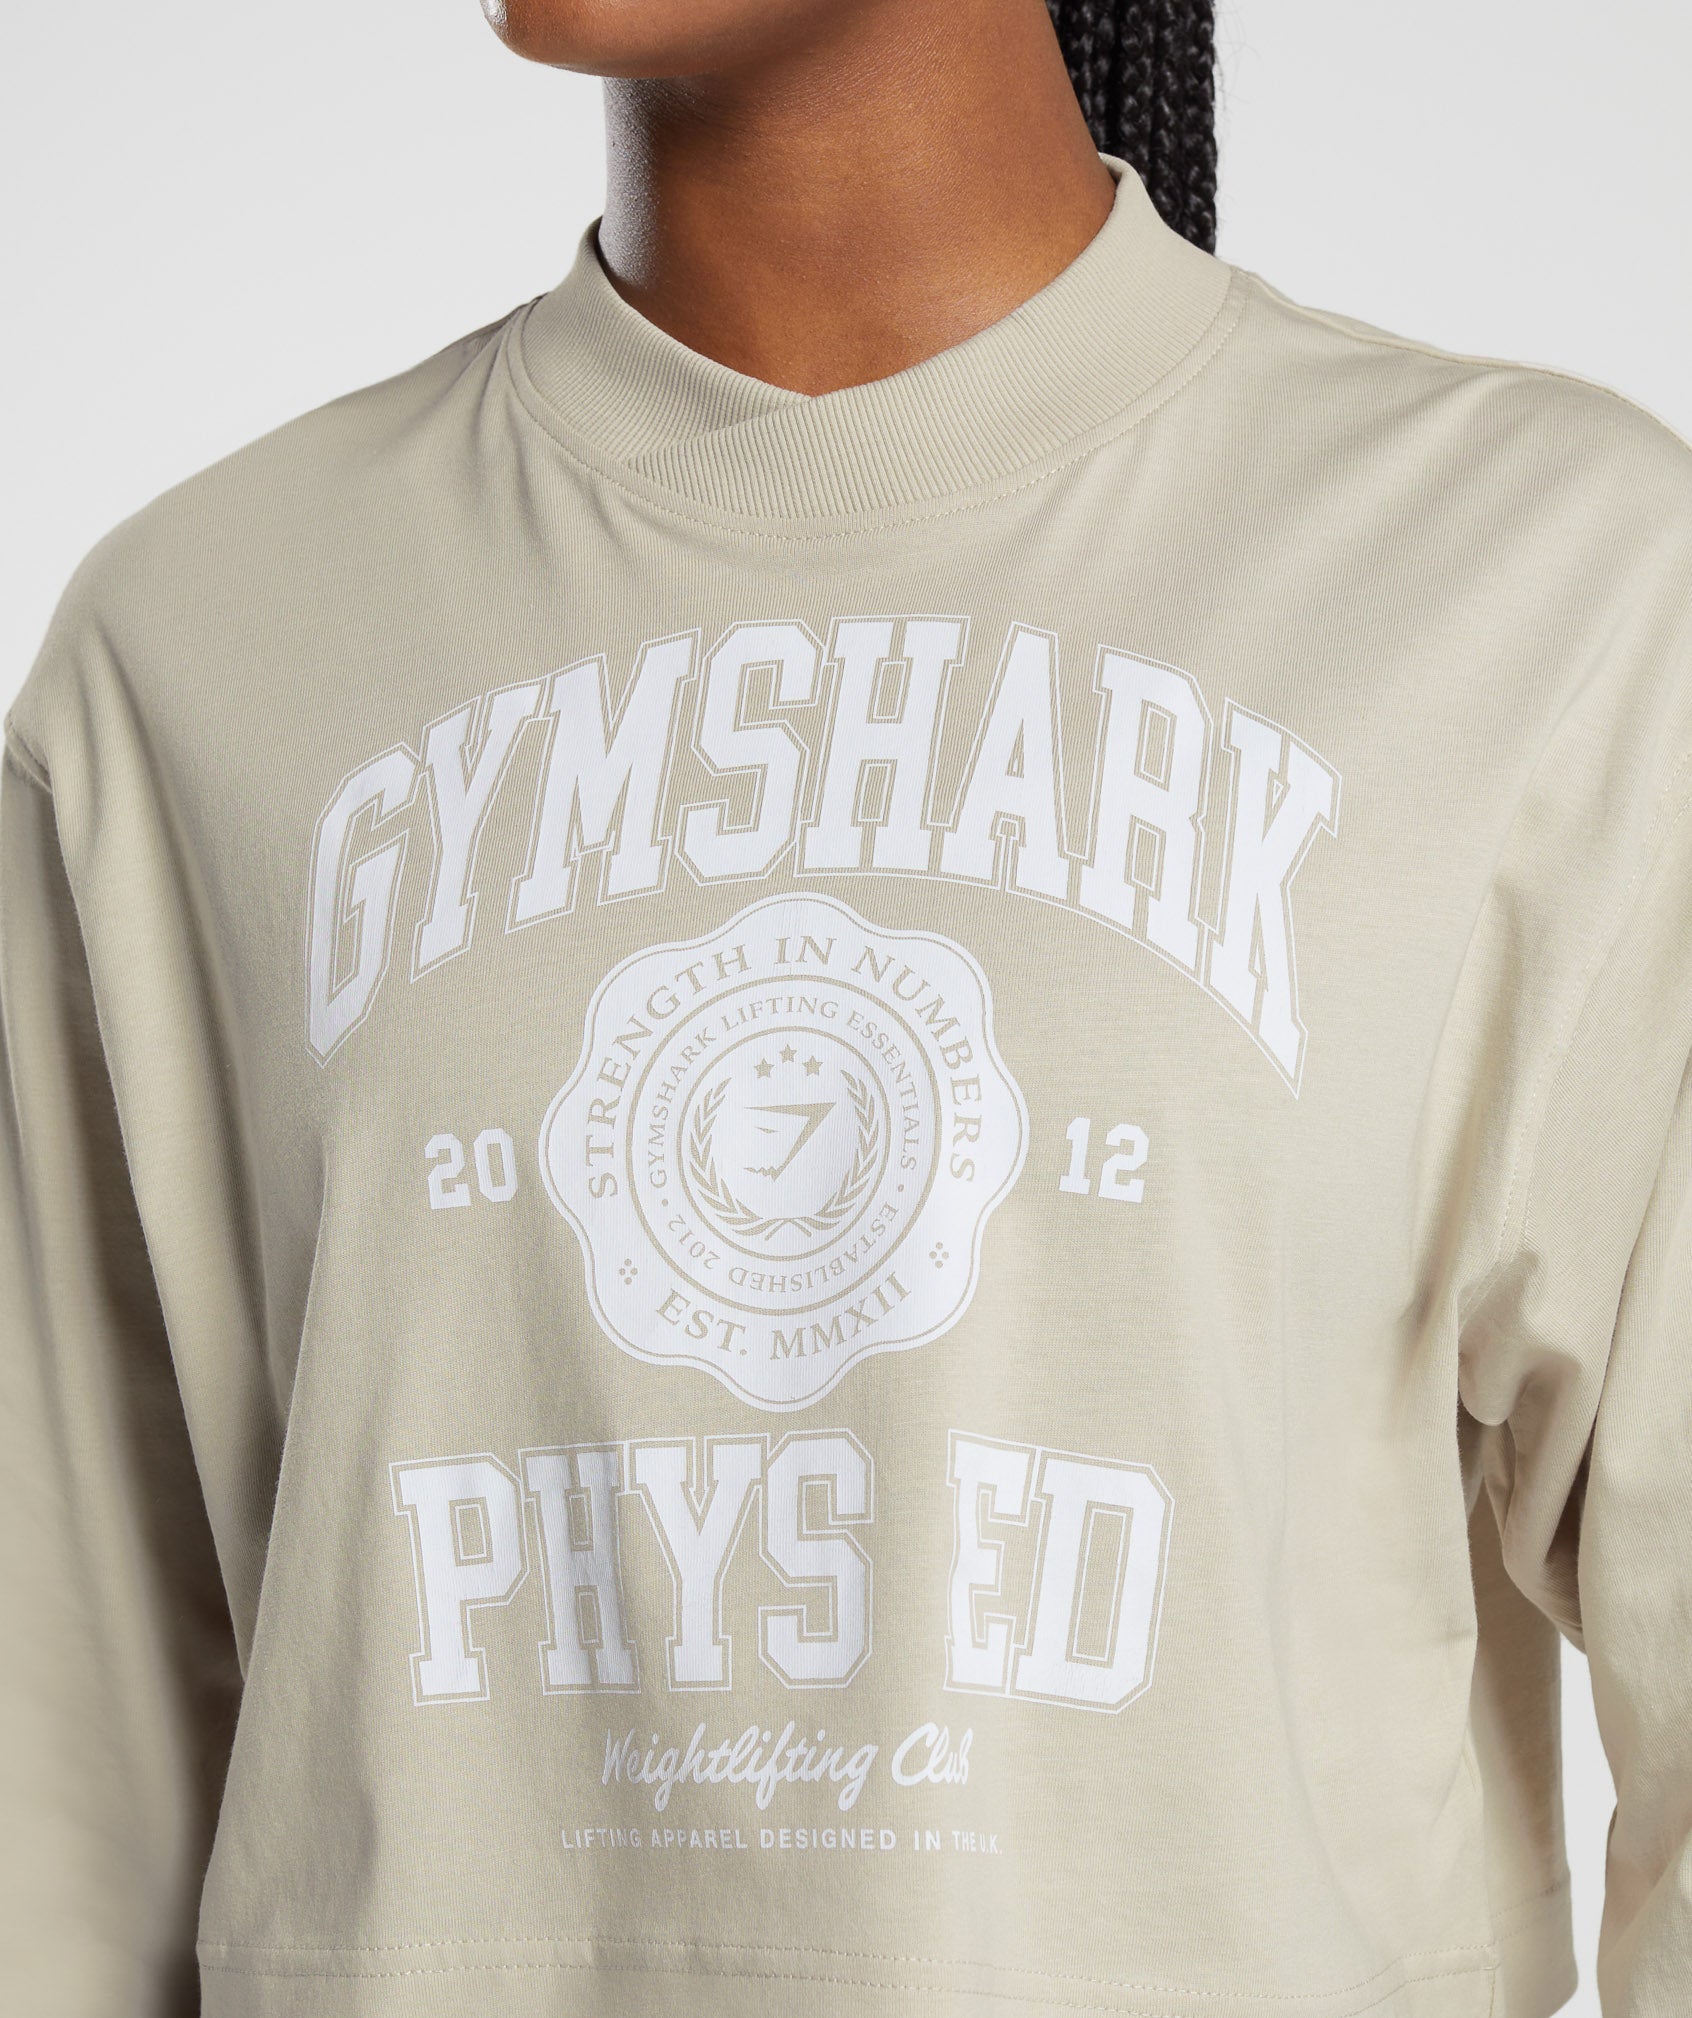 Phys Ed Graphic Long Sleeve T-Shirt in Pebble Grey - view 5